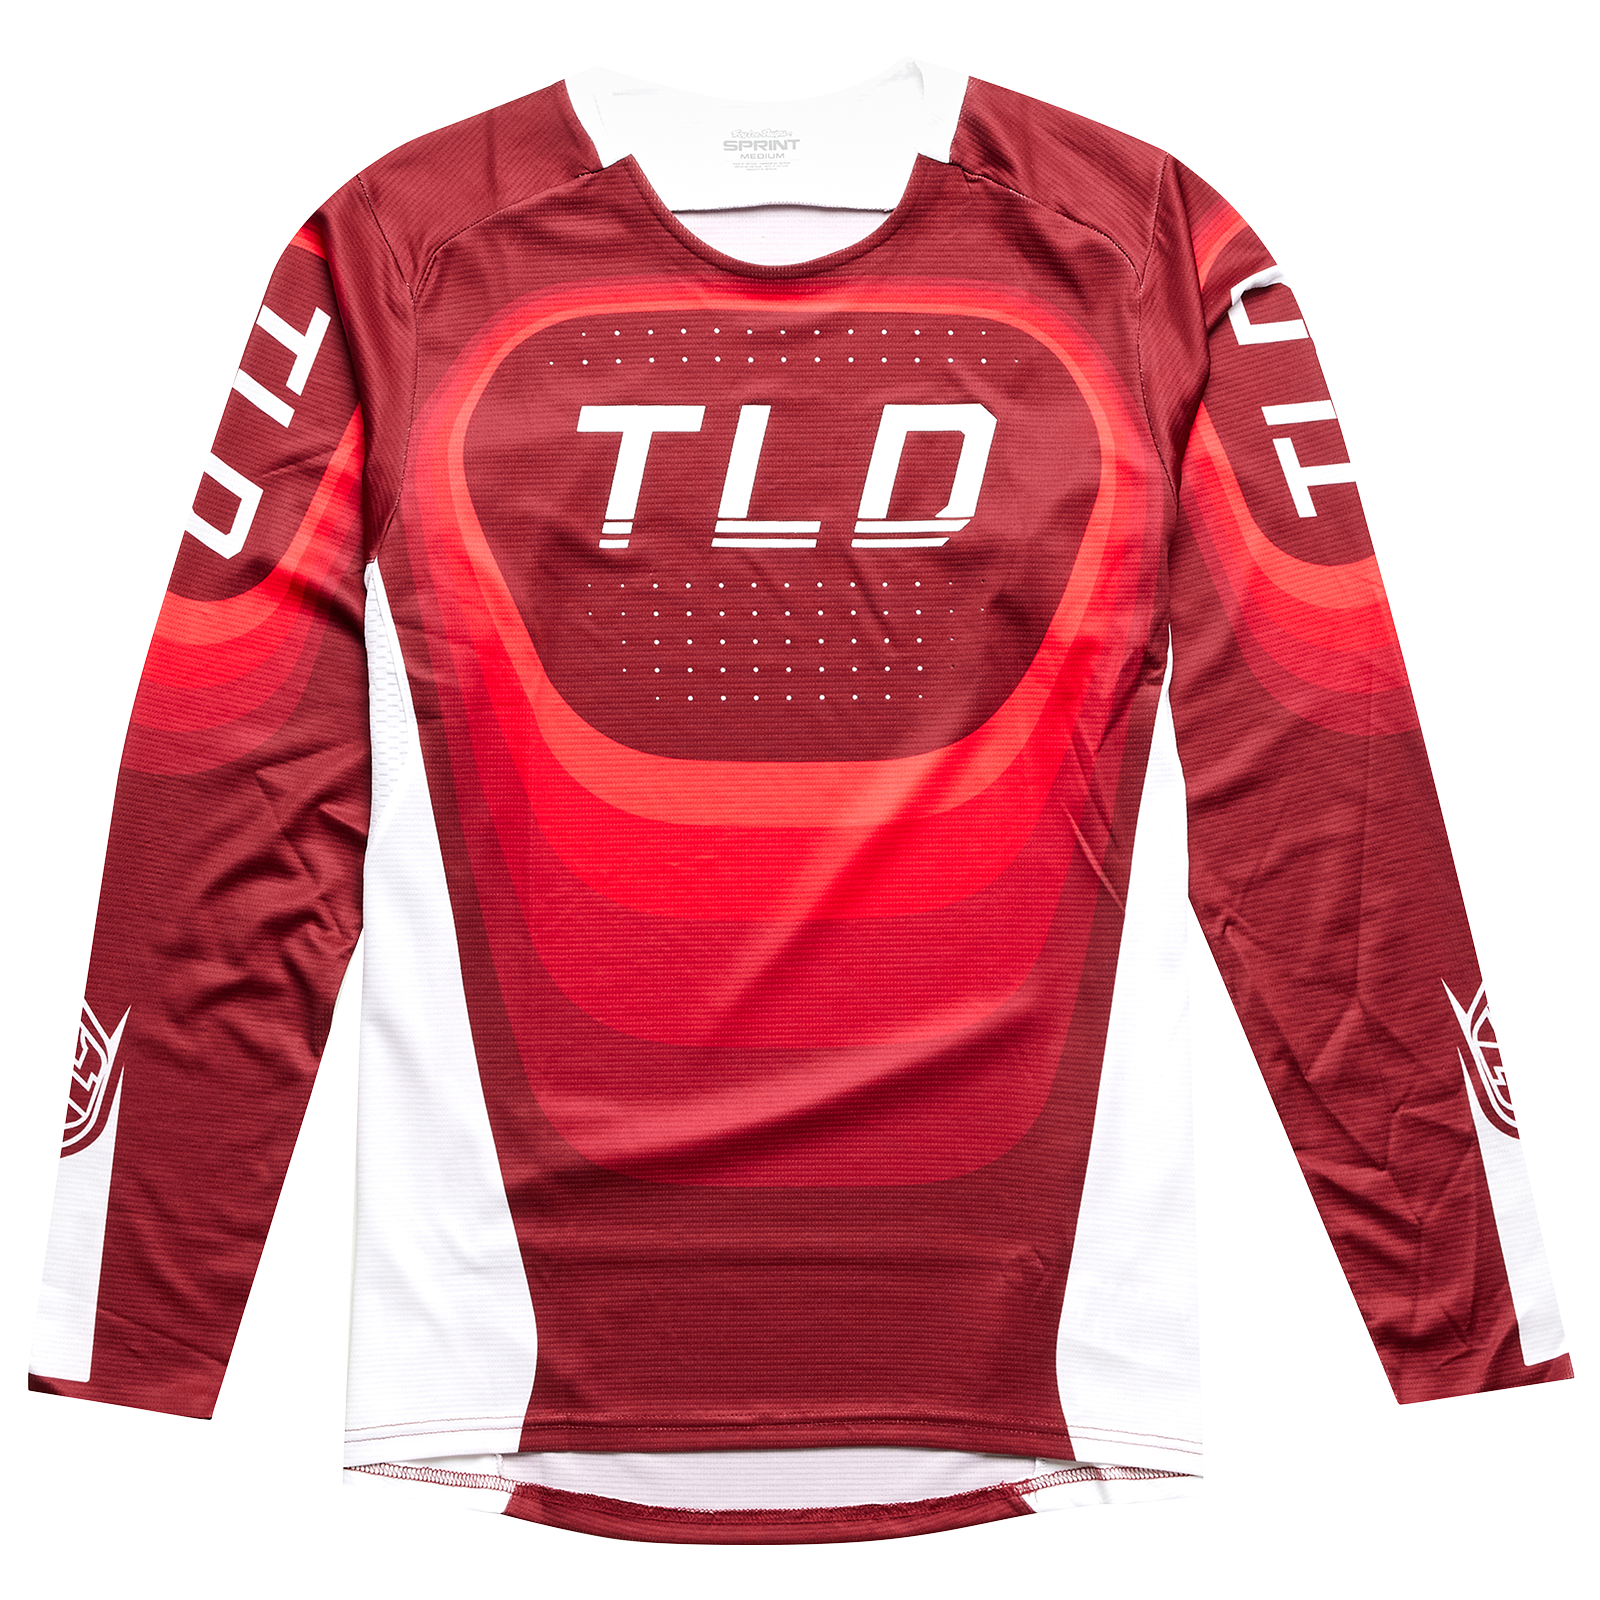 A red and white TLD Sprint Jersey Reverb Race Red BMX race jersey with the word tld on it.